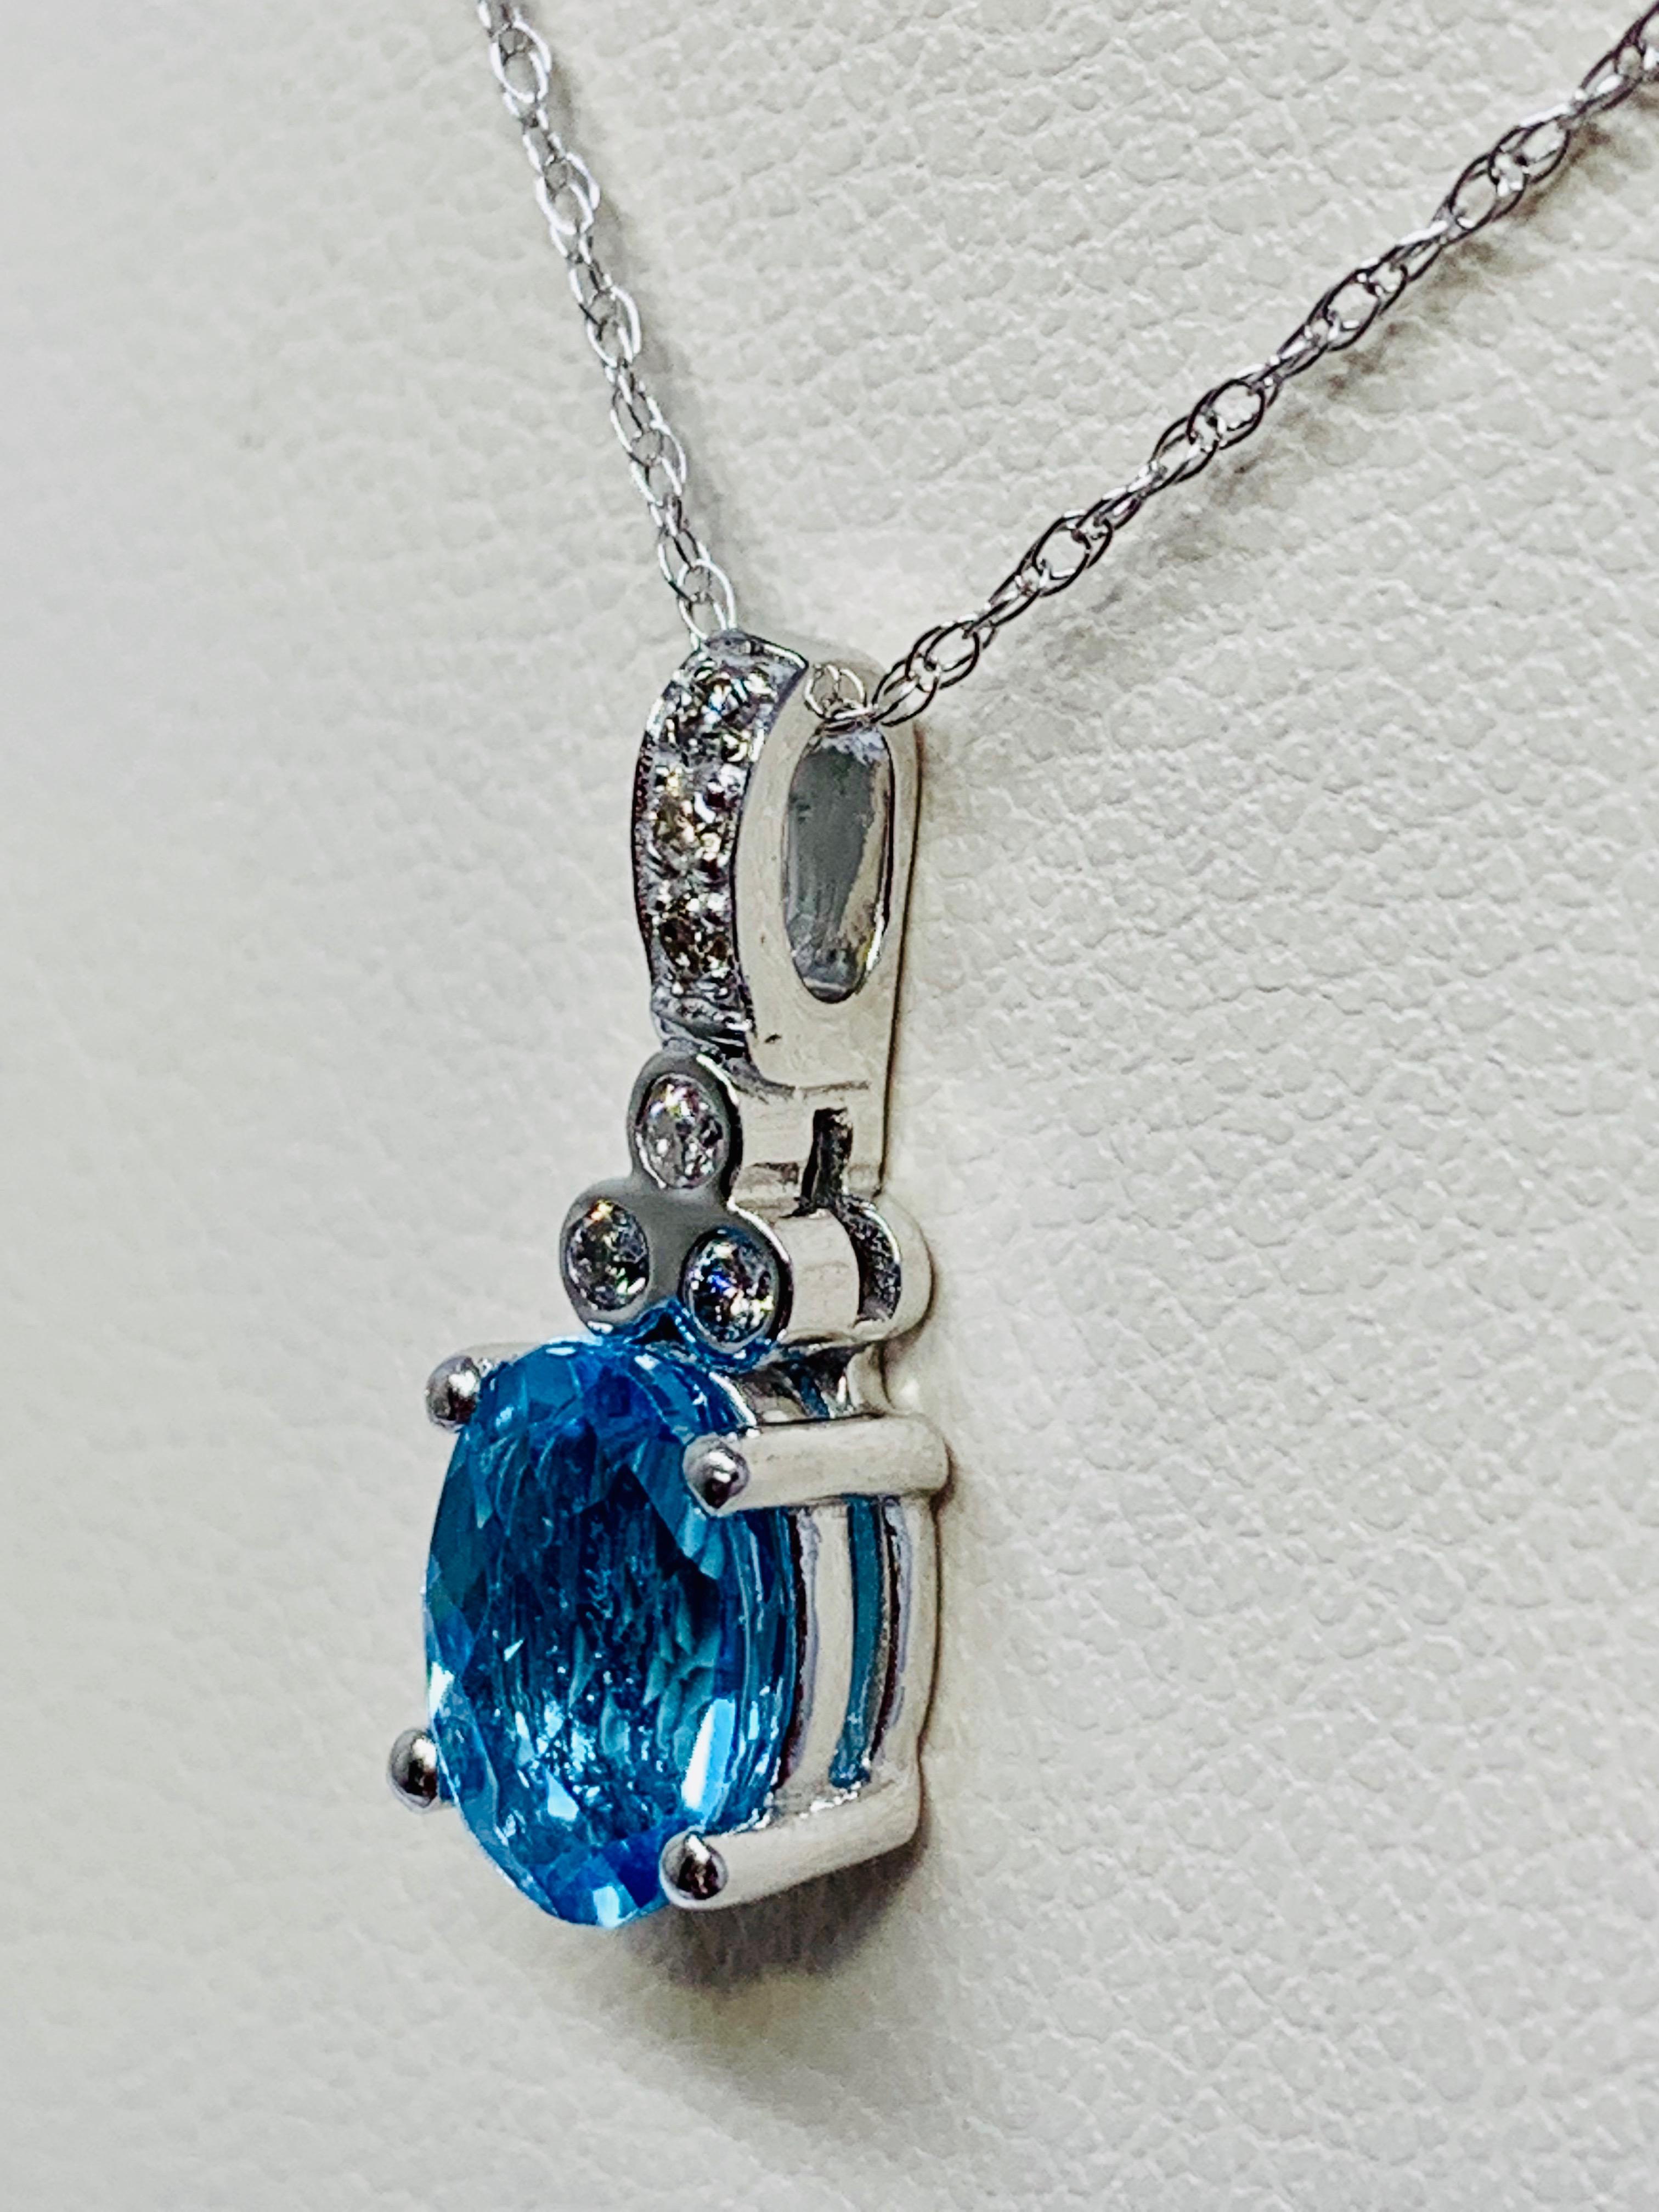 Contemporary 10 Karat White Gold 1.35 Carat Total Weight Blue Topaz and Diamond Necklace